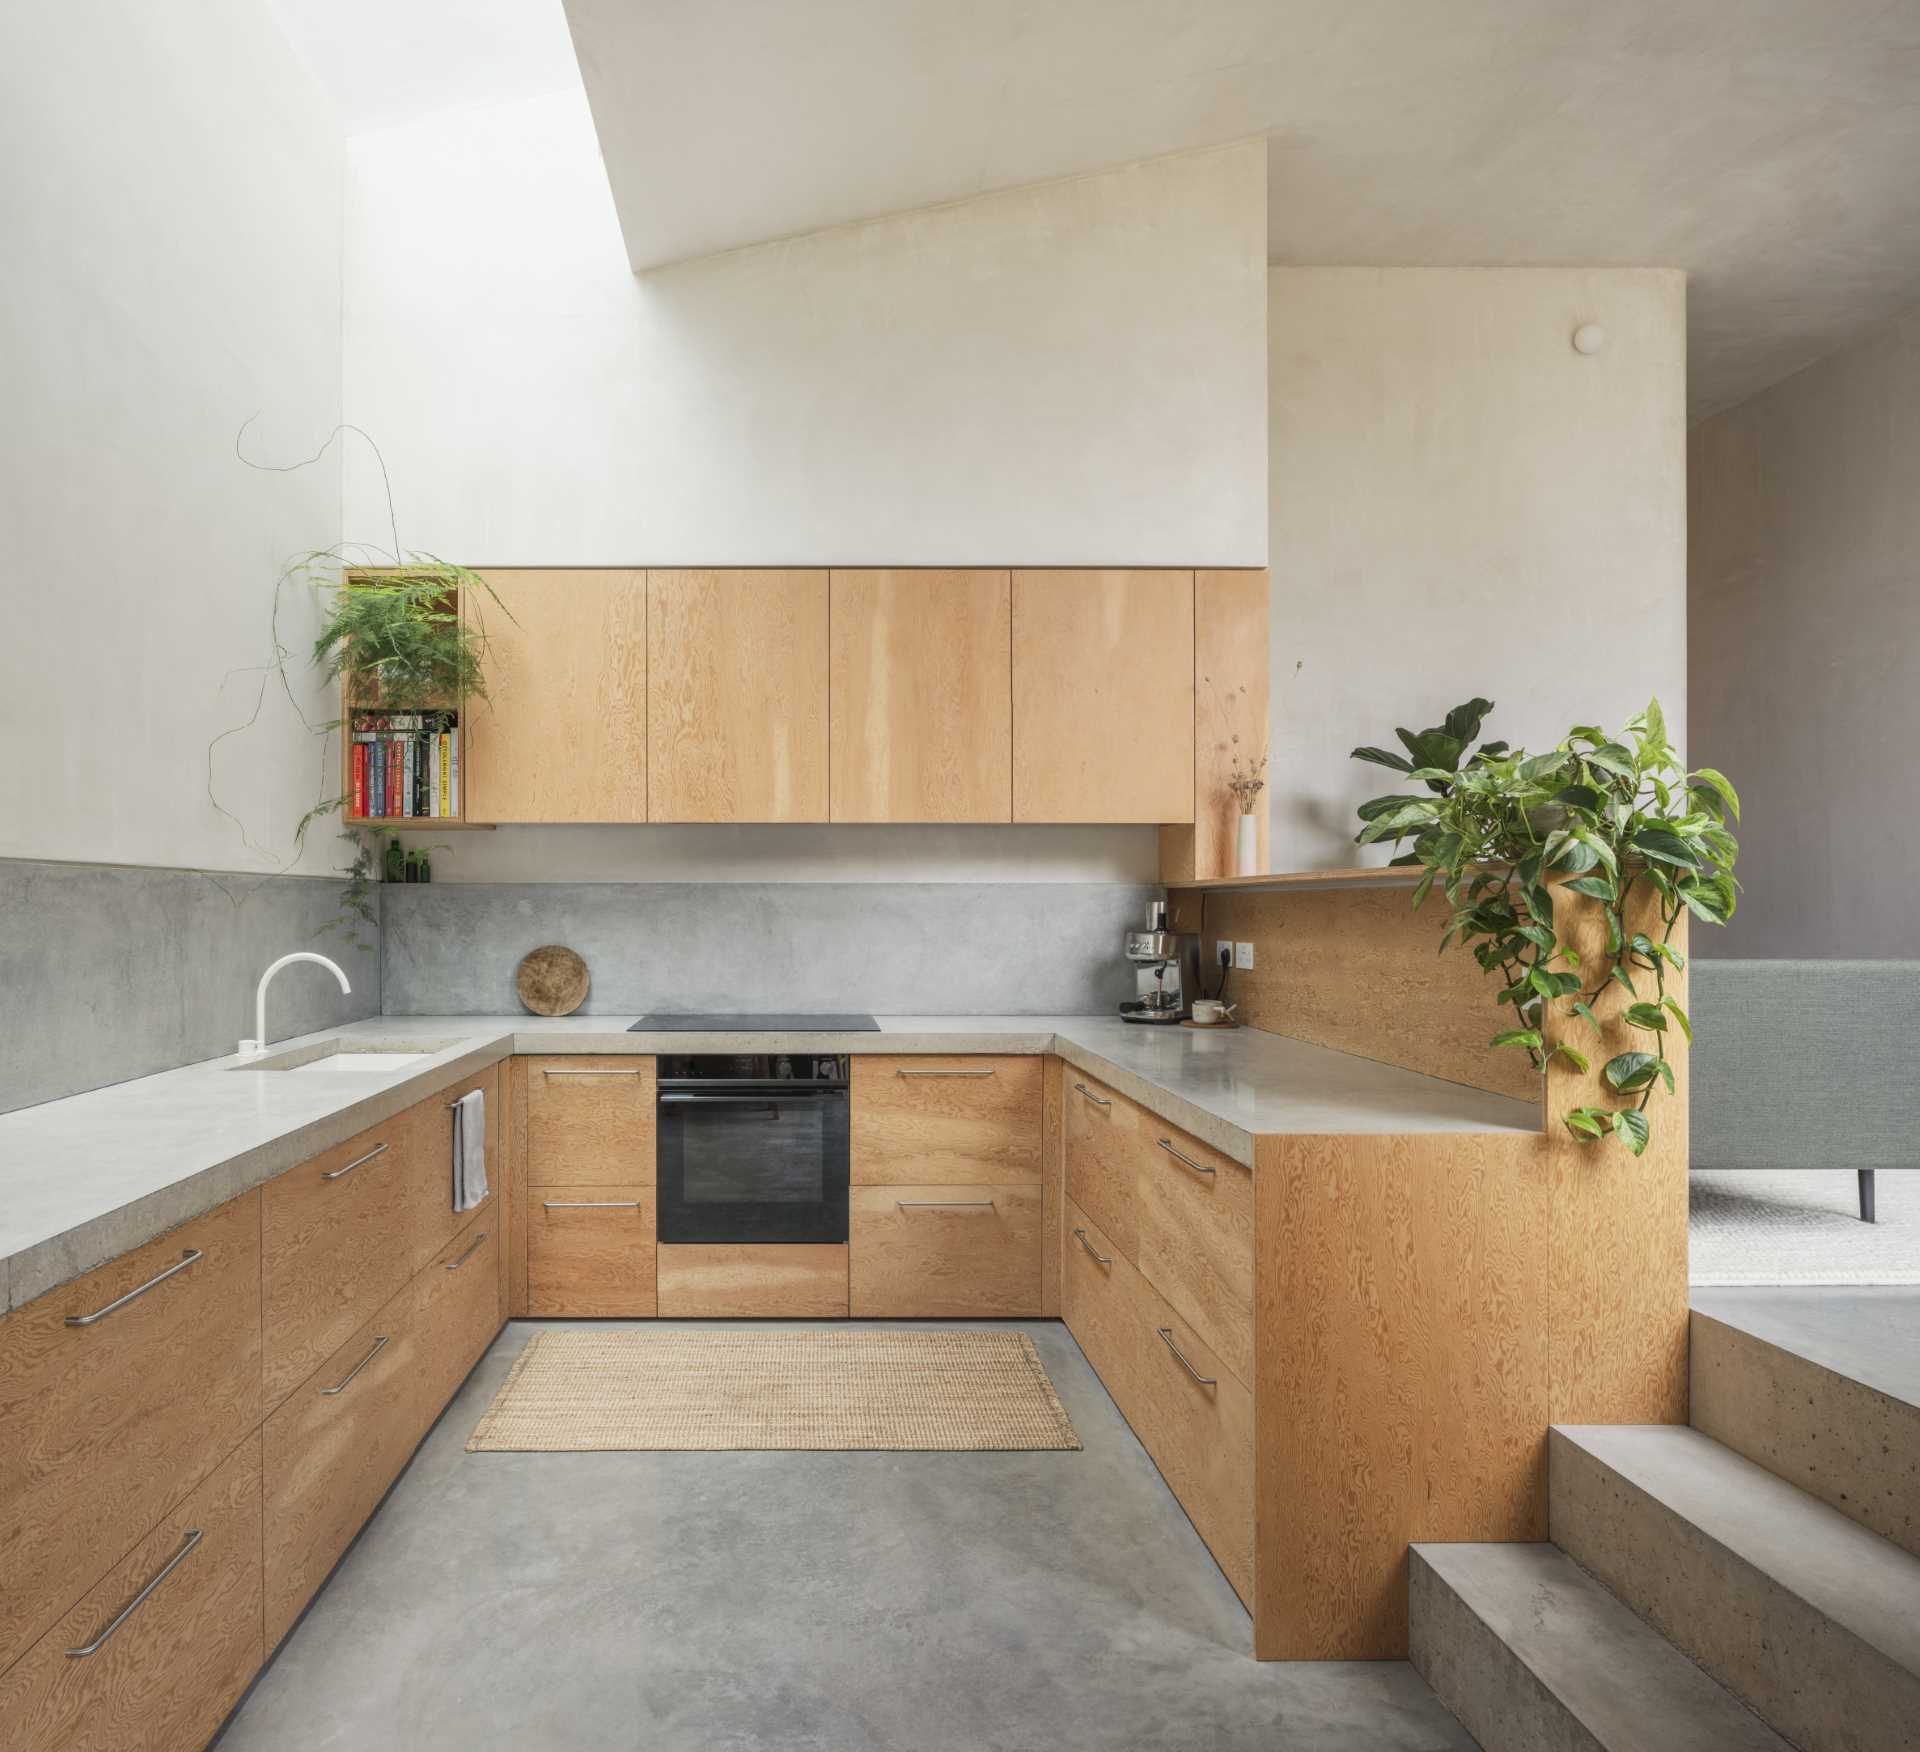 This new kitchen includes cast concrete countertop, deep Douglas fir plywood cabinets, and a 9 foot (3m) skylight.